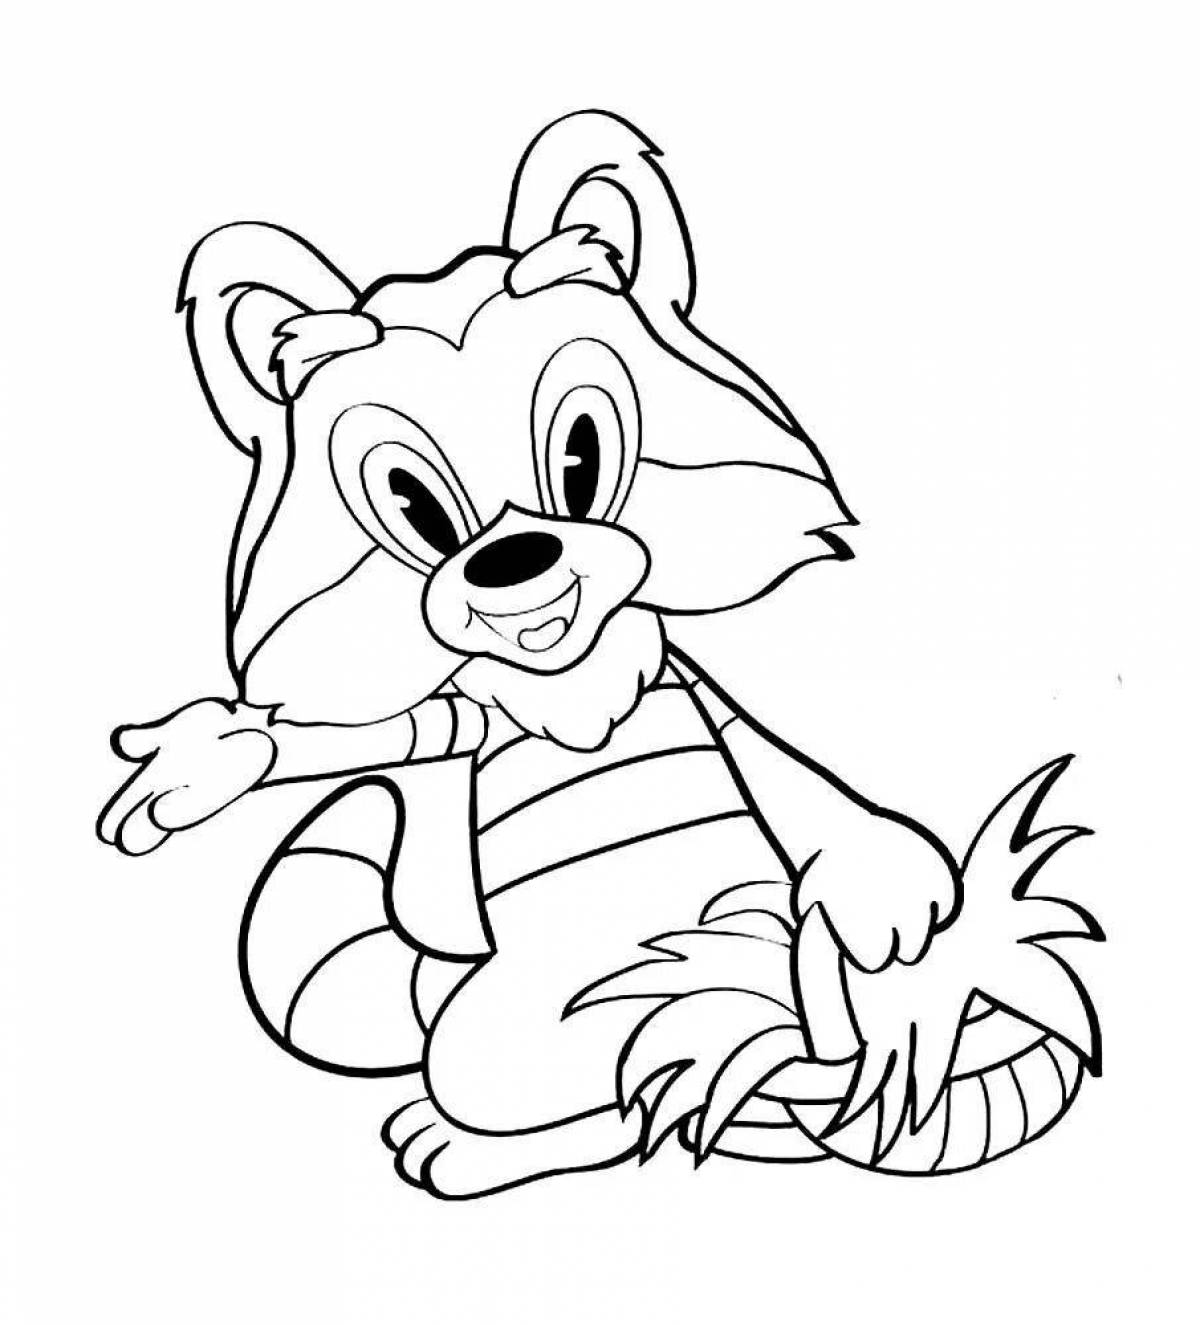 Animated raccoon coloring page